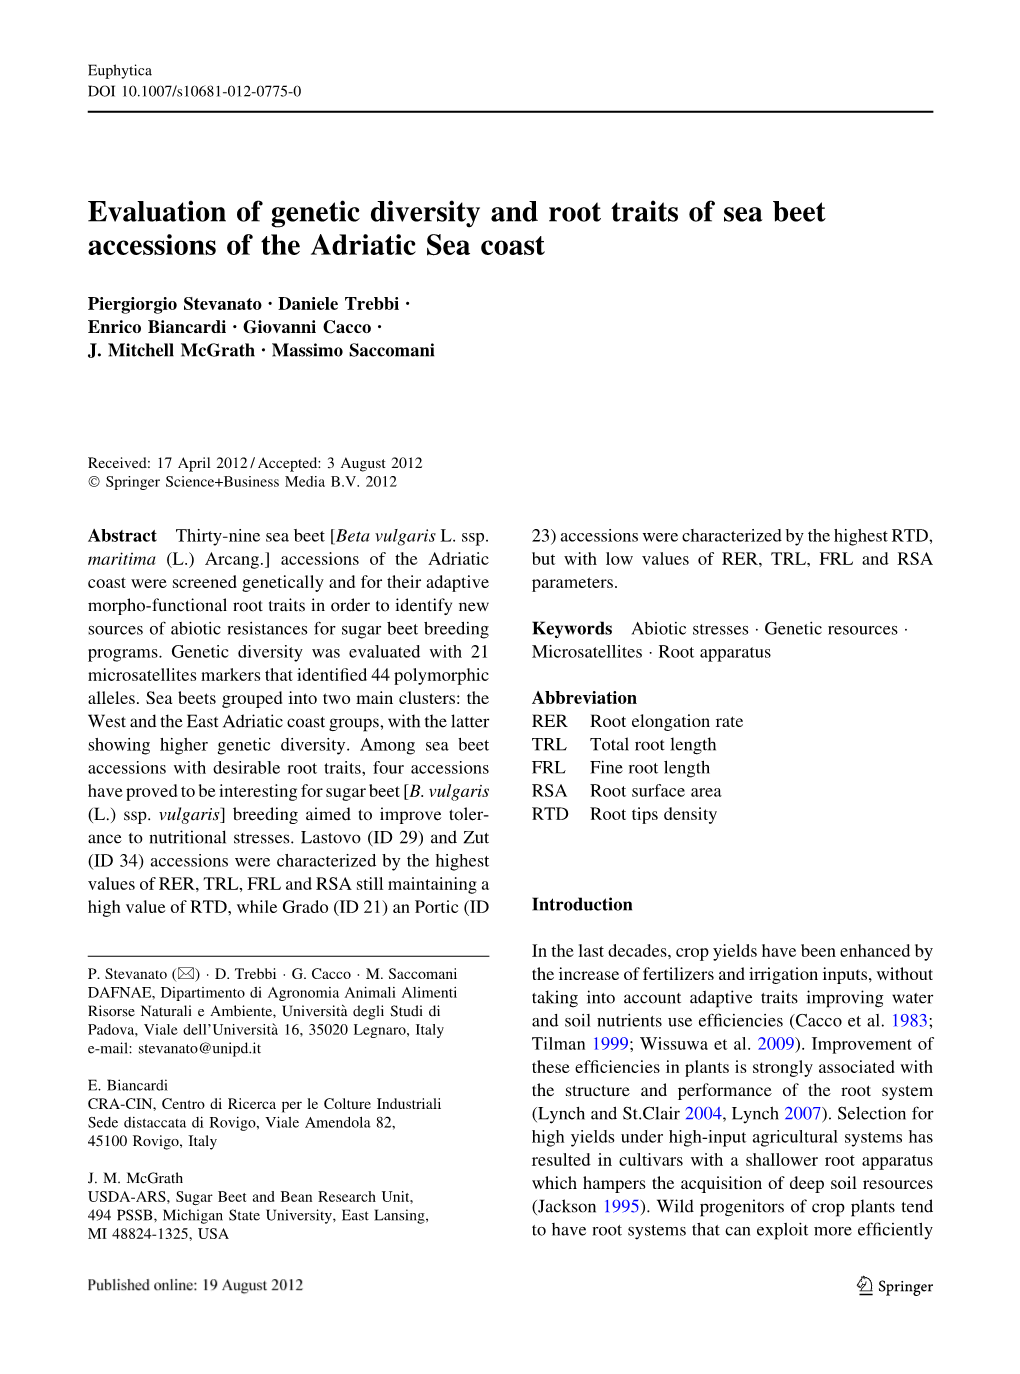 Evaluation of Genetic Diversity and Root Traits of Sea Beet Accessions of the Adriatic Sea Coast